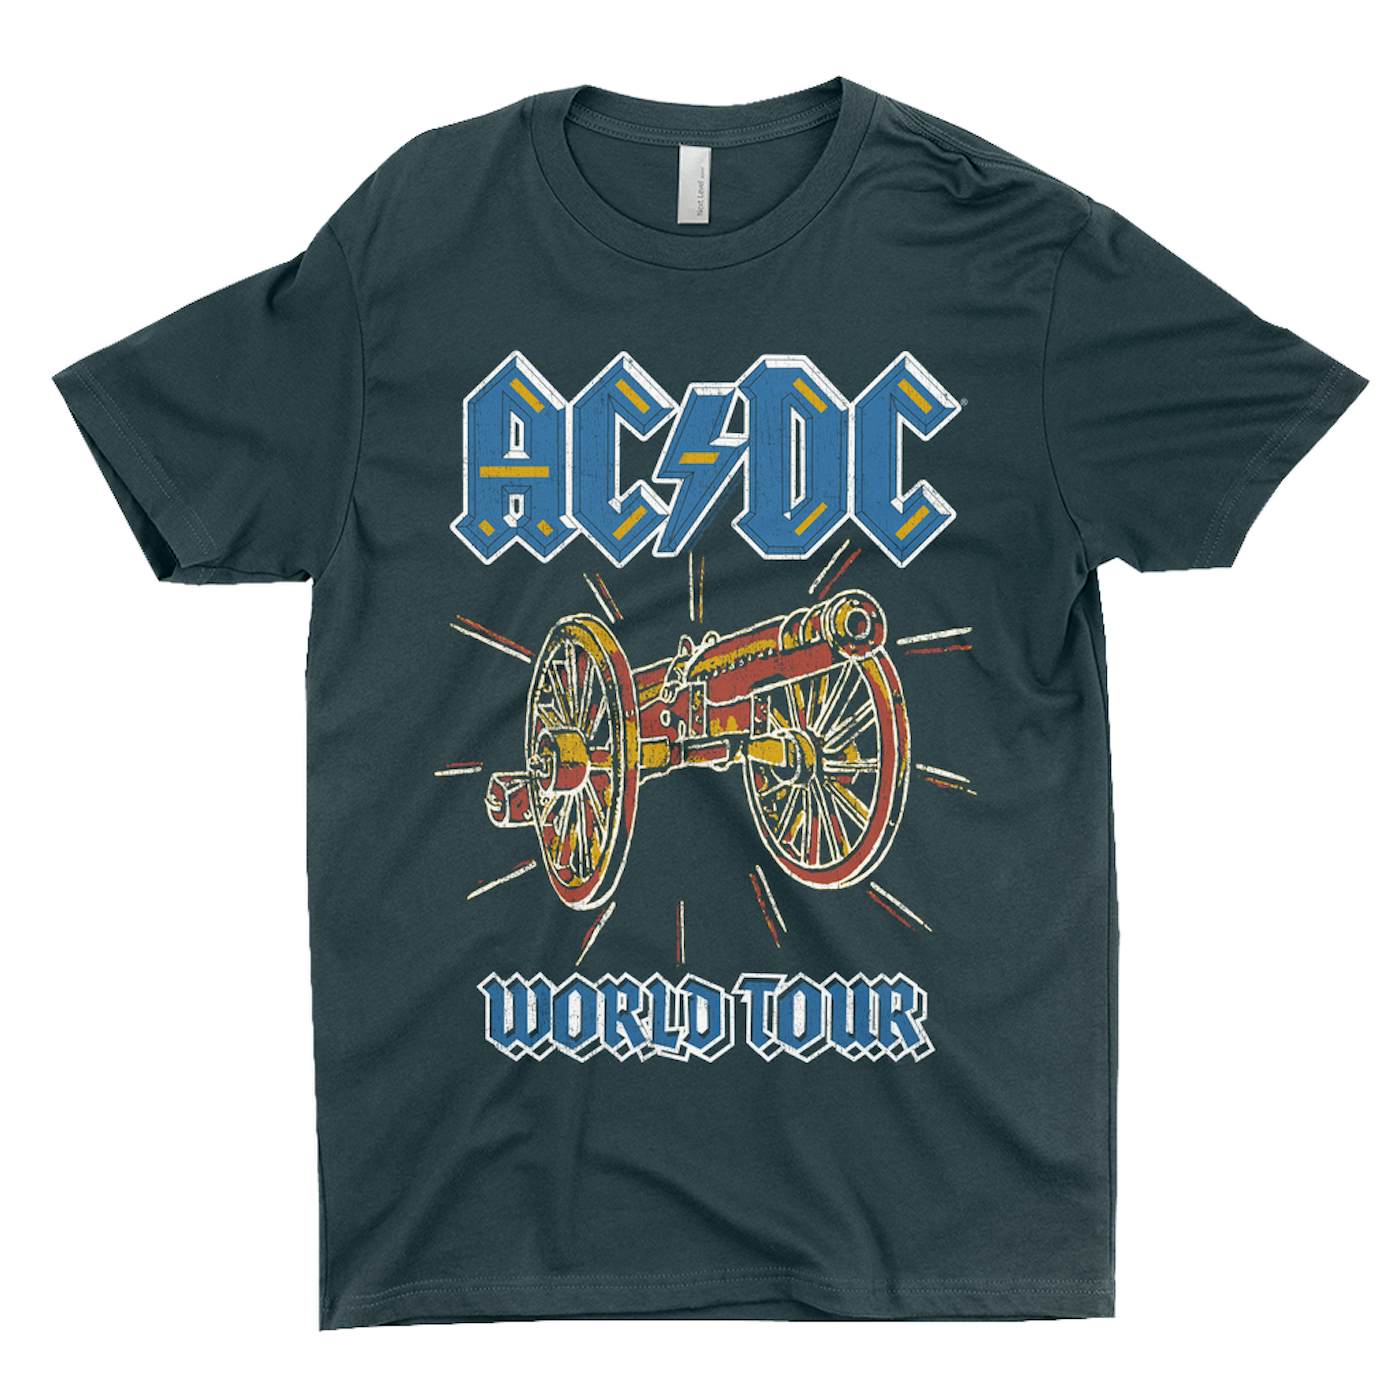 AC/DC T-Shirt | World Tour For Those About To Rock Cannon Image Shirt